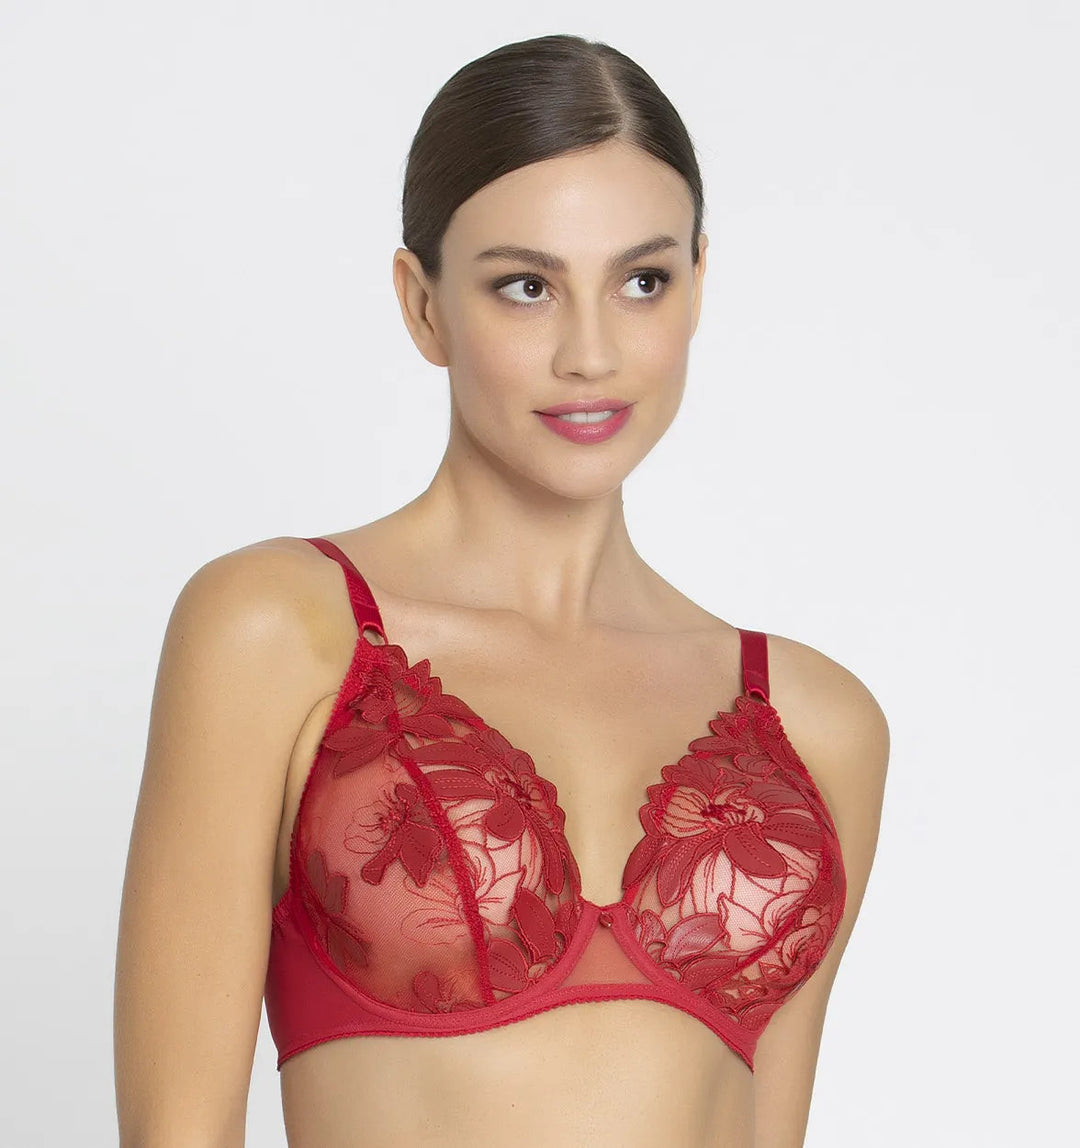 Lise Charmel - Glamour Couture Triangel-BH ohne Bügel Glam Desir Triangel-BH Lise Charmel